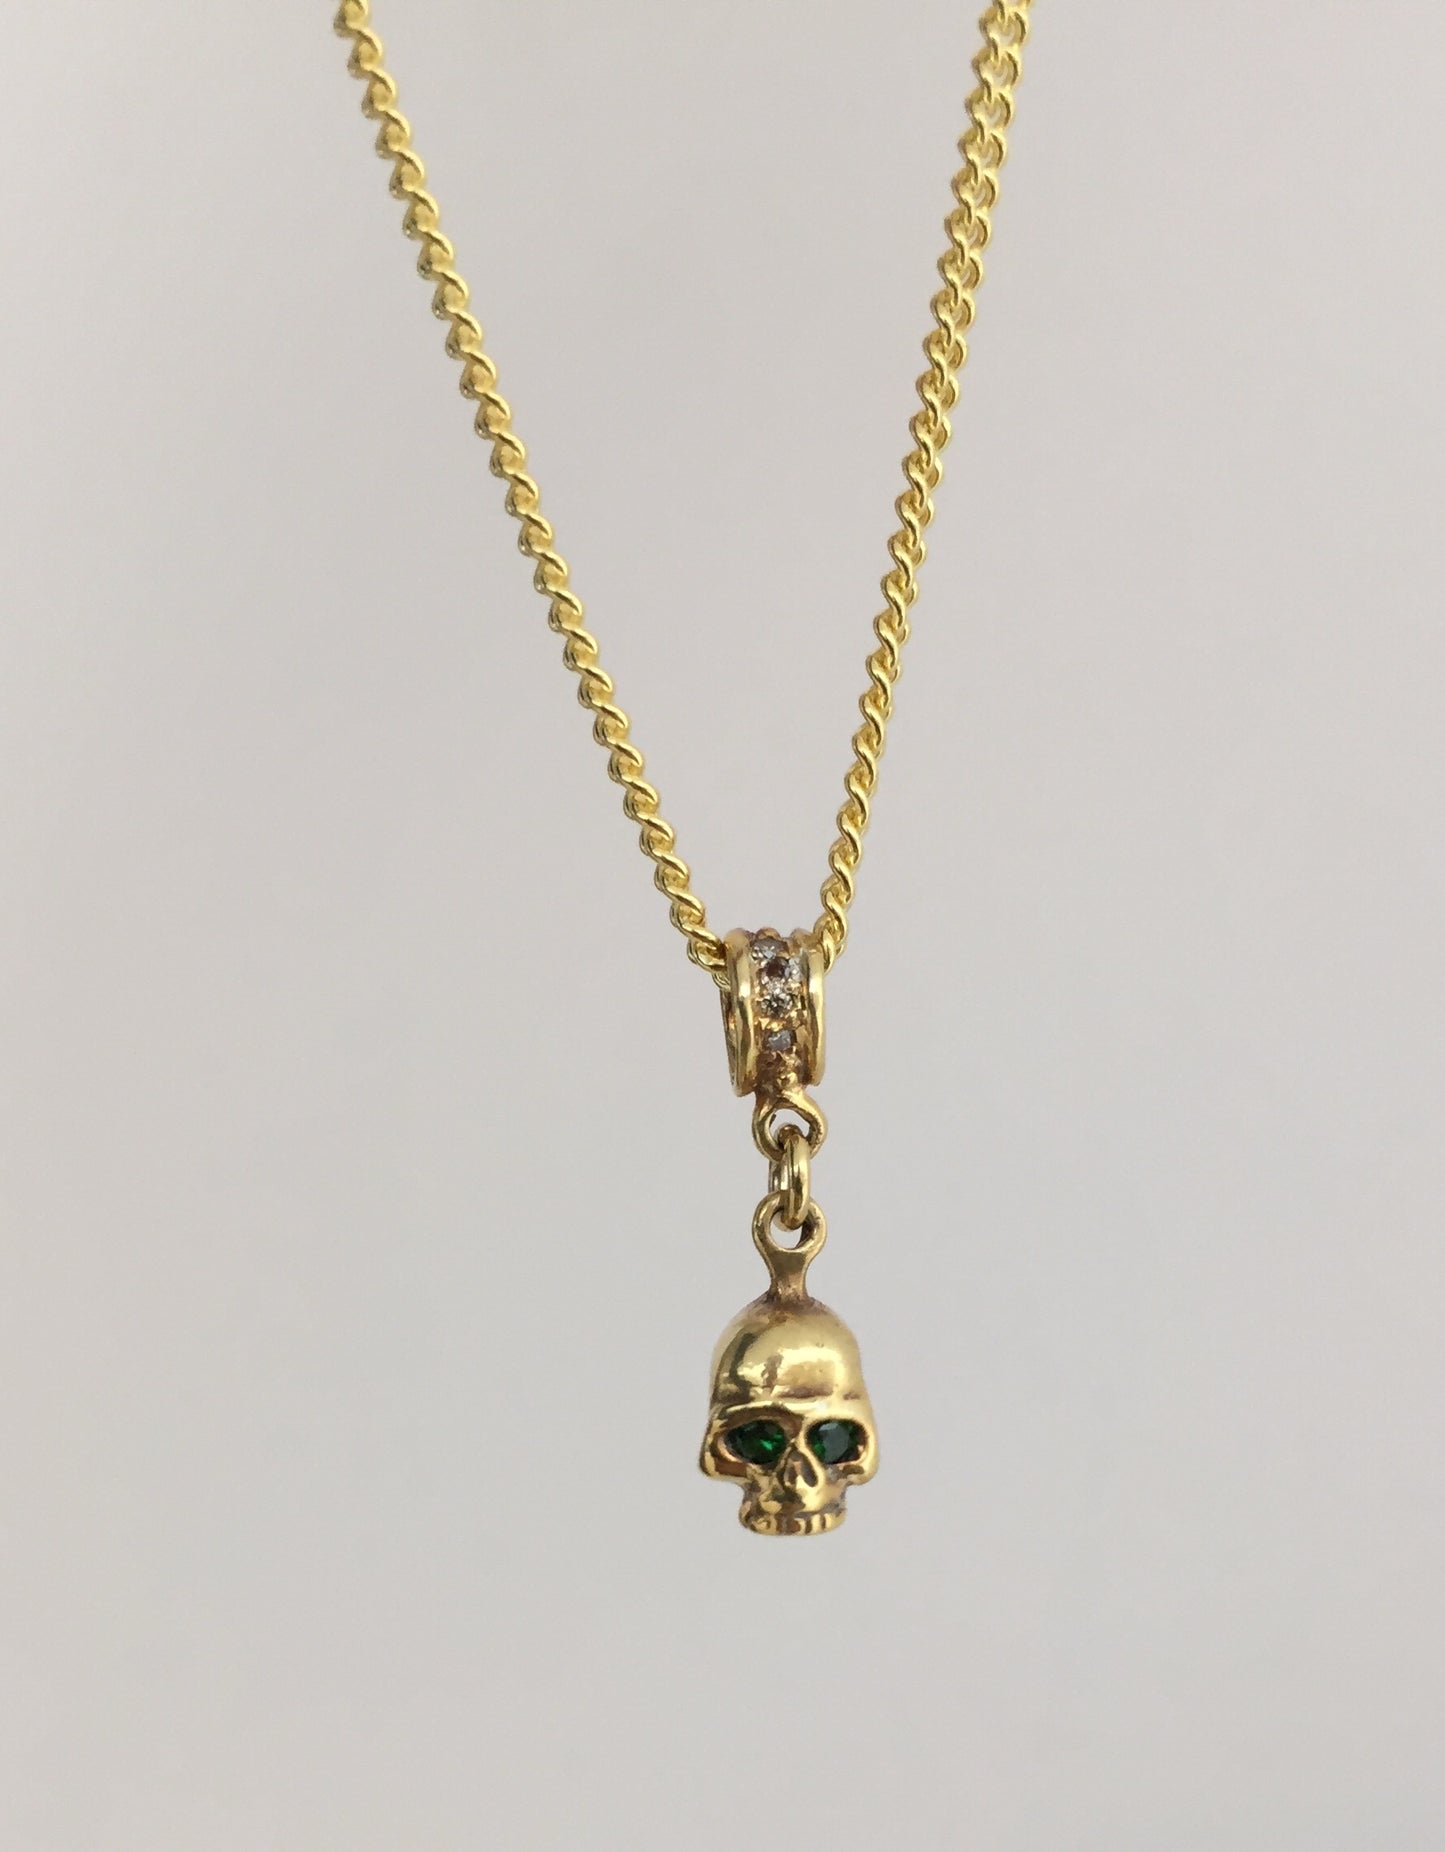 Necklace - Golden Skull with Emeralds in sterling silver by Roman Paul